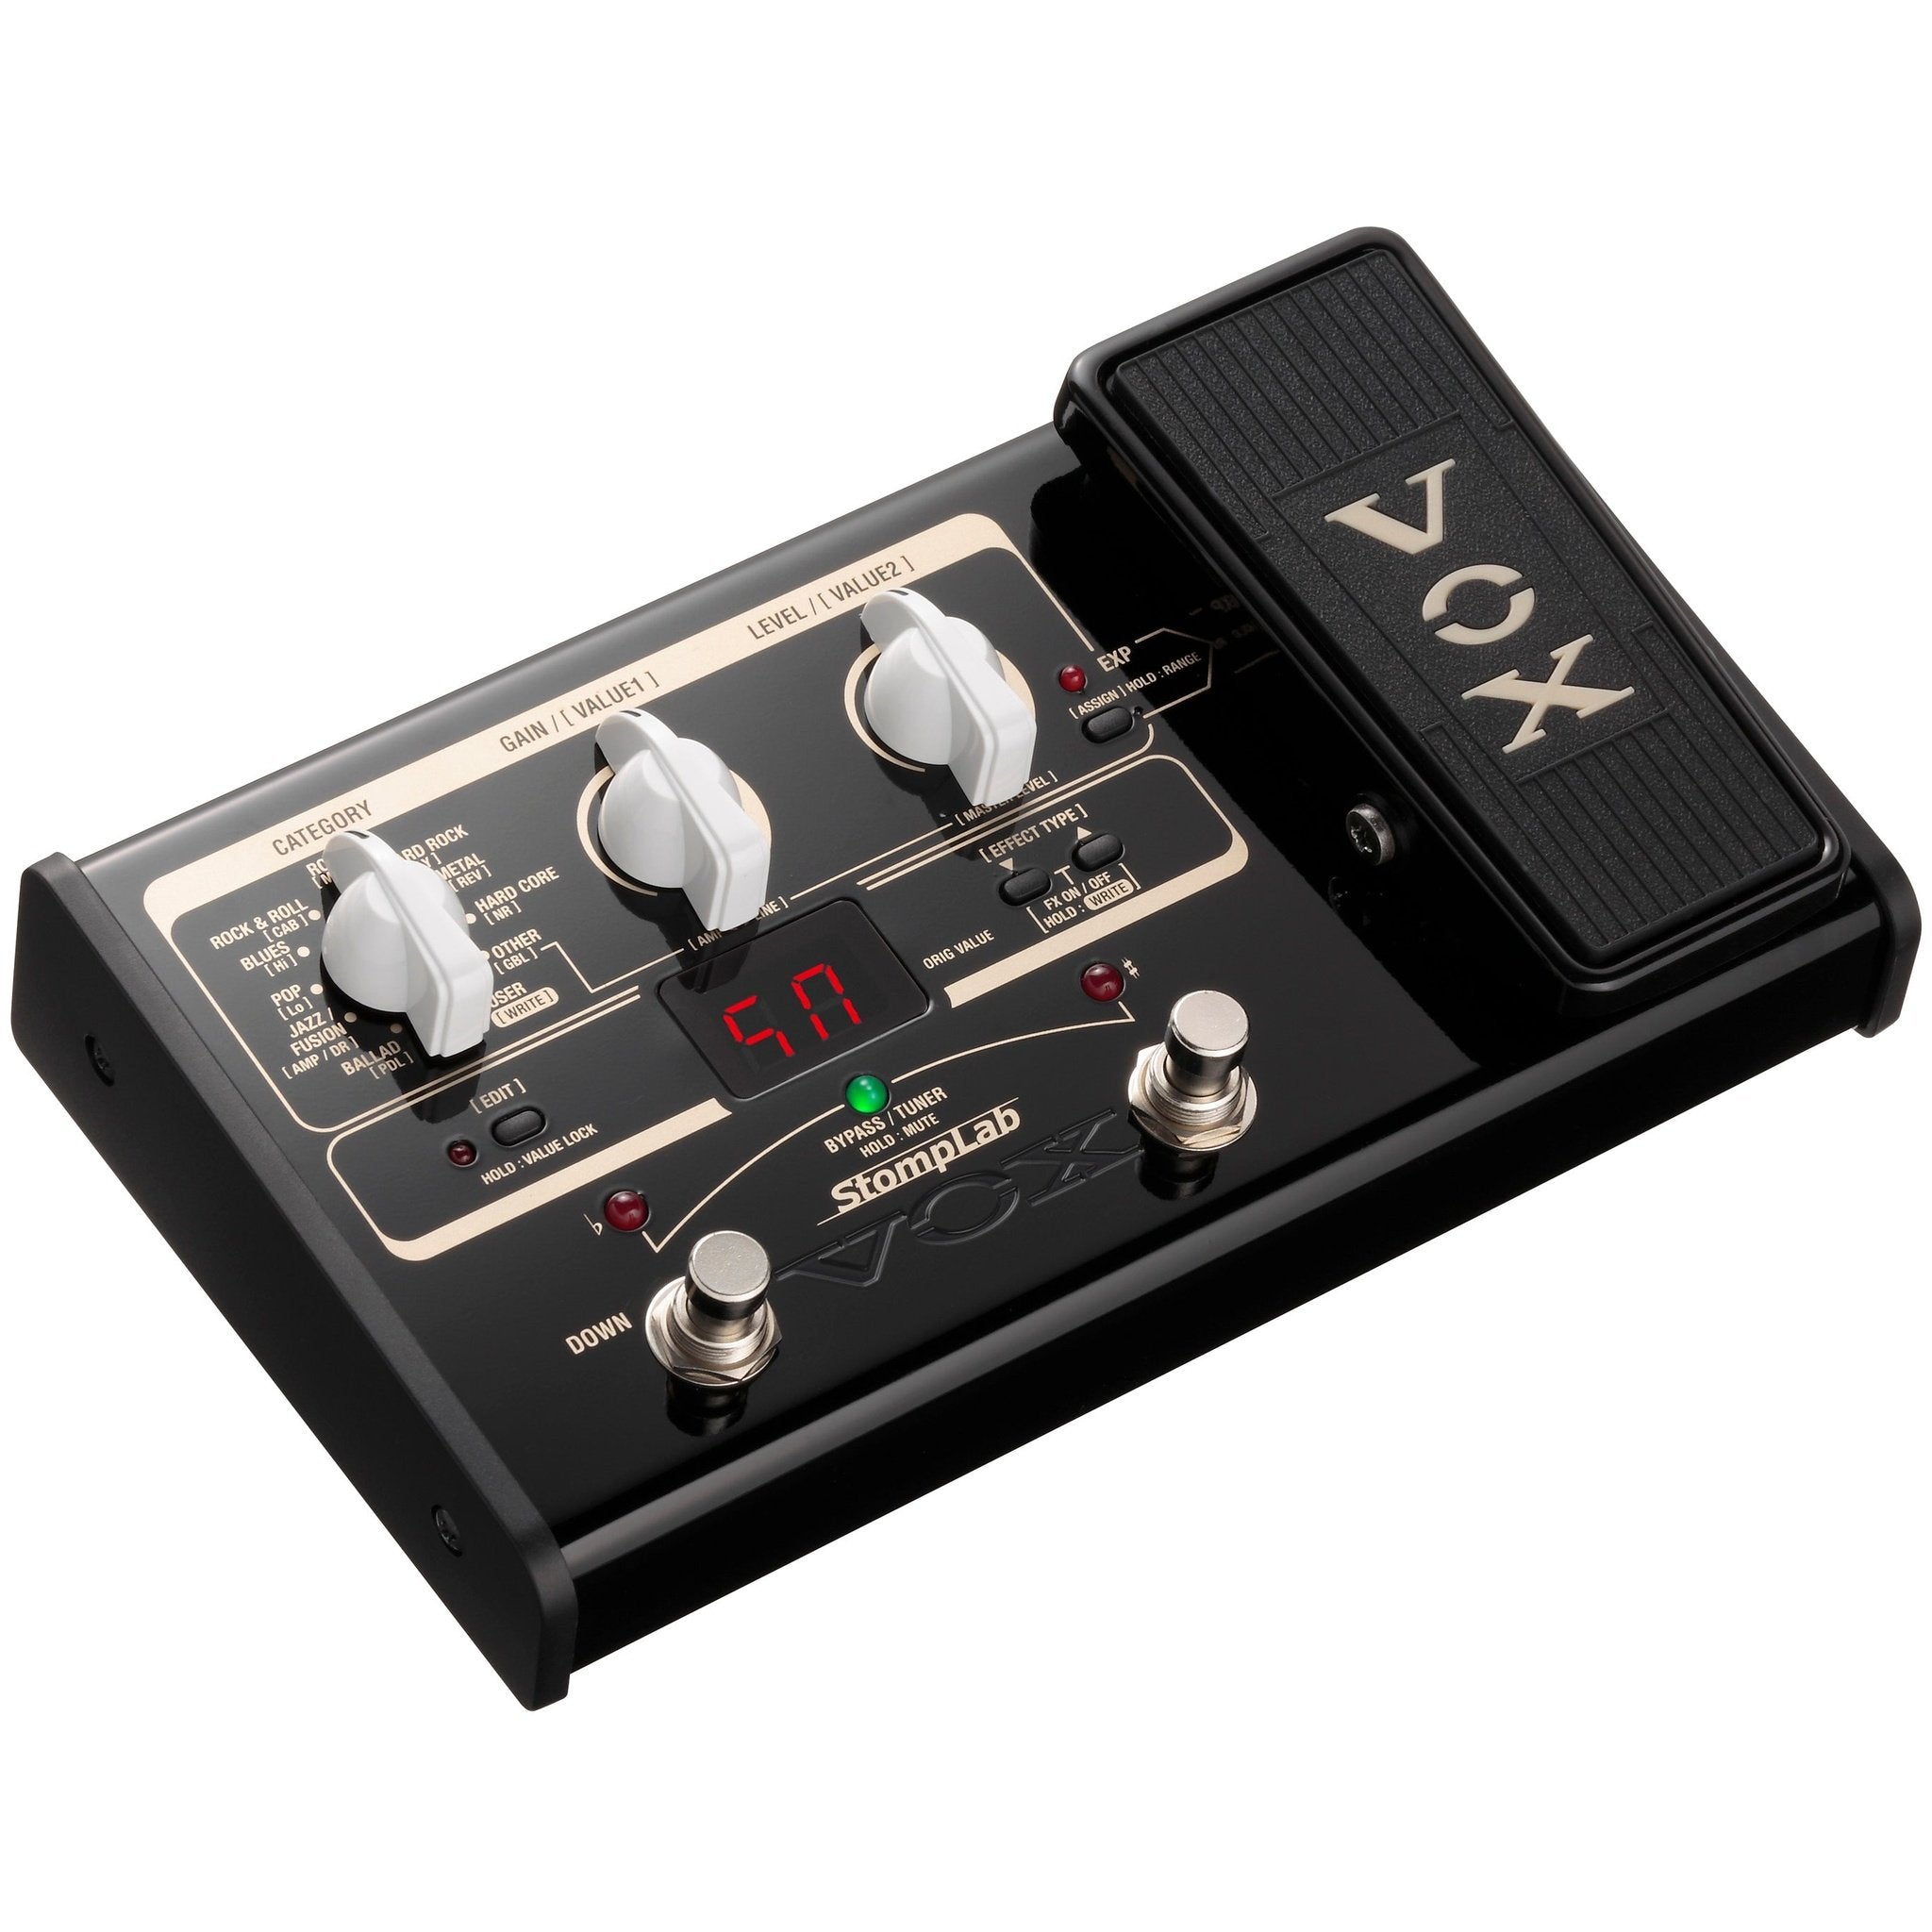 Vox Stomplab 2G Multi Effects - Guitar w/ Expression Pedal 2